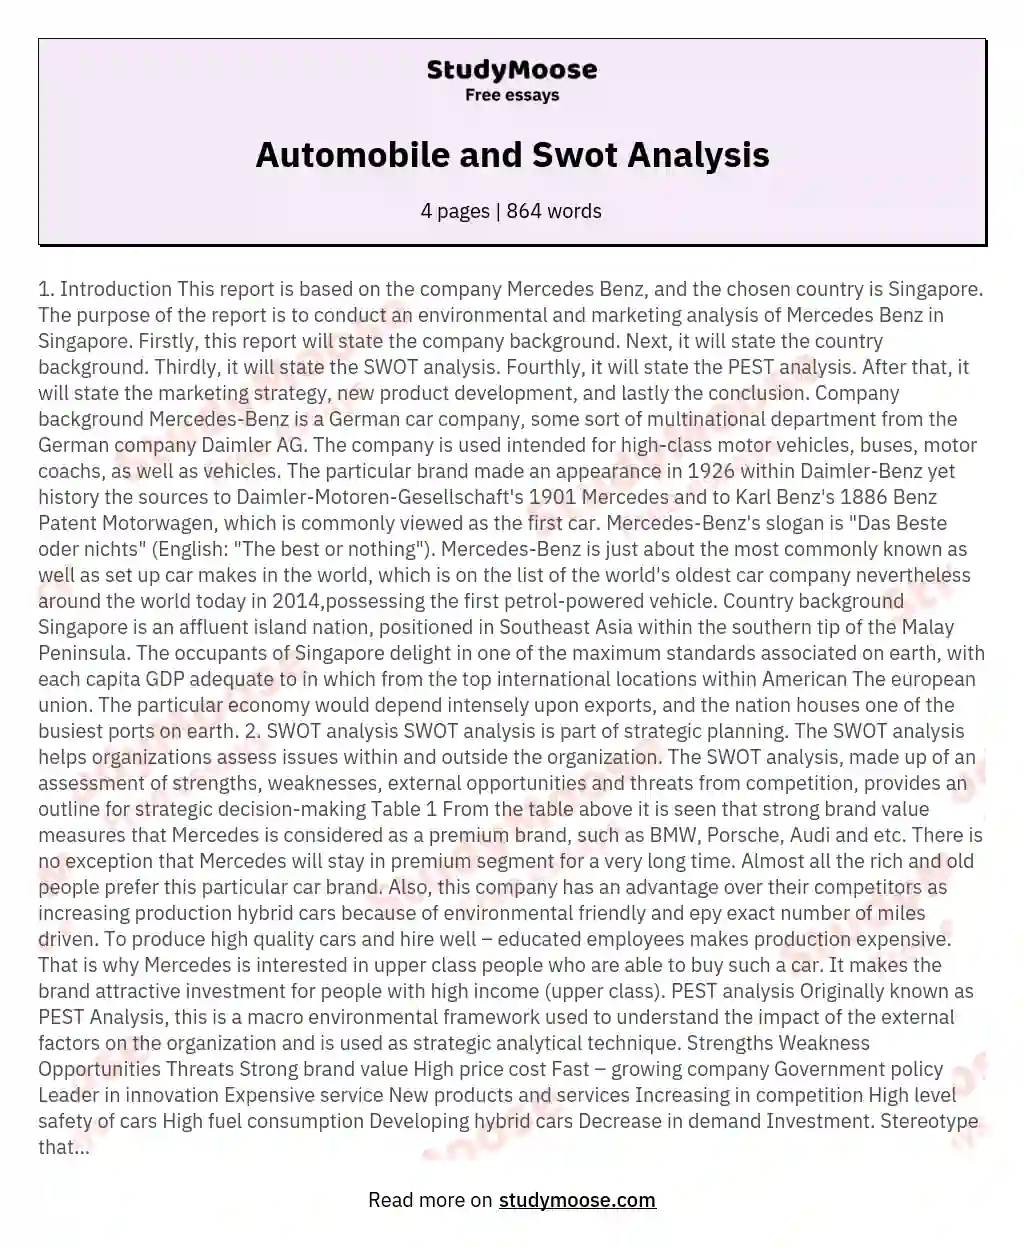 Automobile and Swot Analysis essay